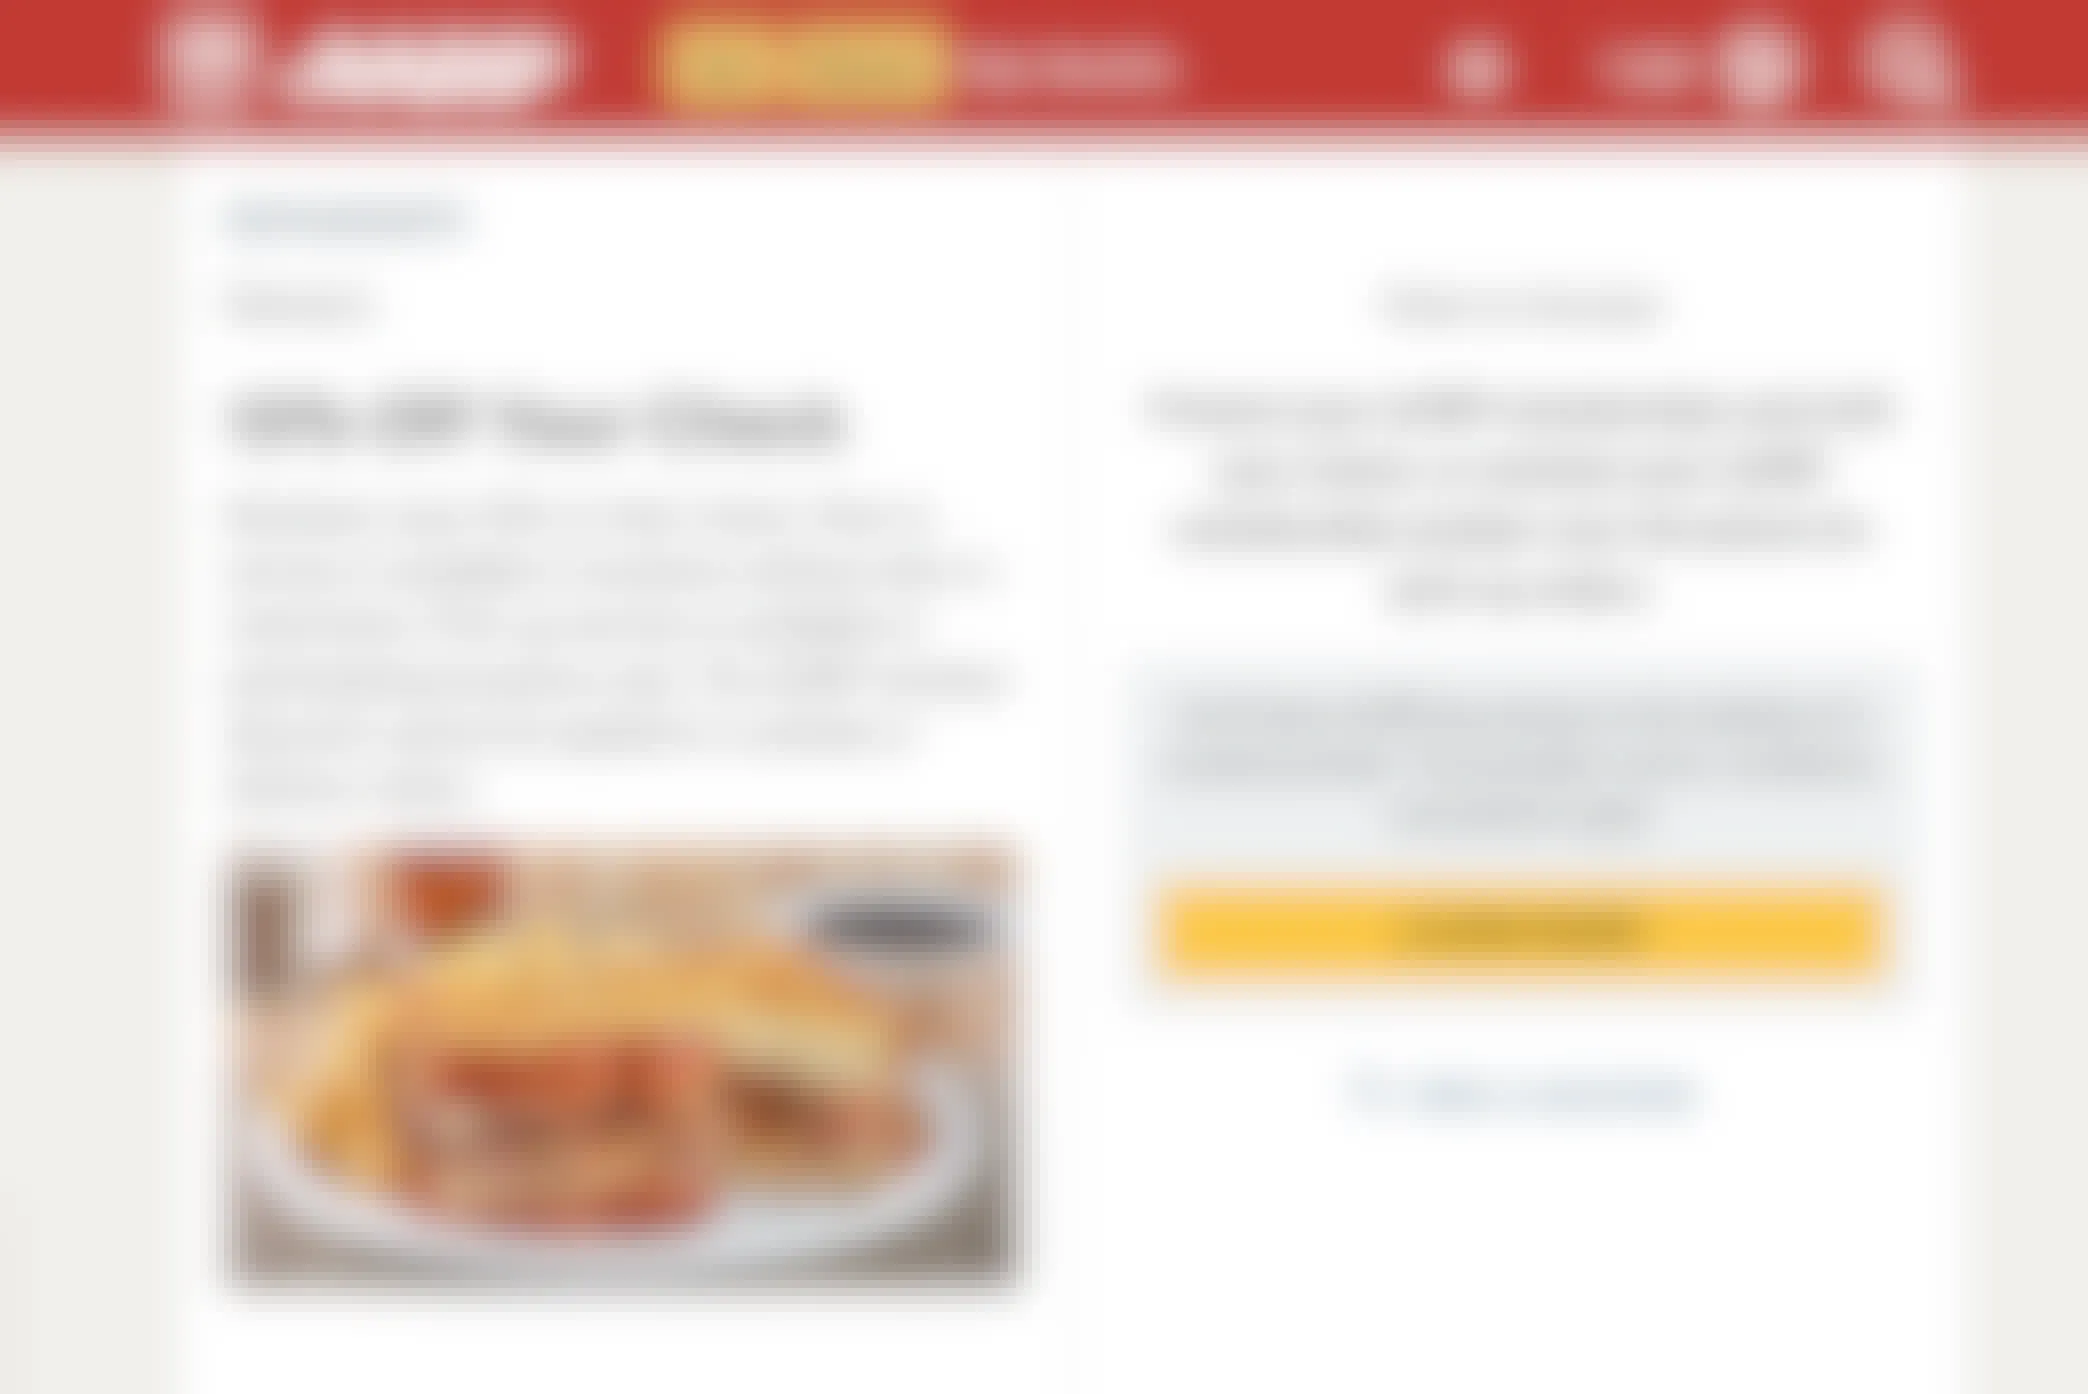 A screenshot from the AARP website showing a discount for 15% off at Denny's.